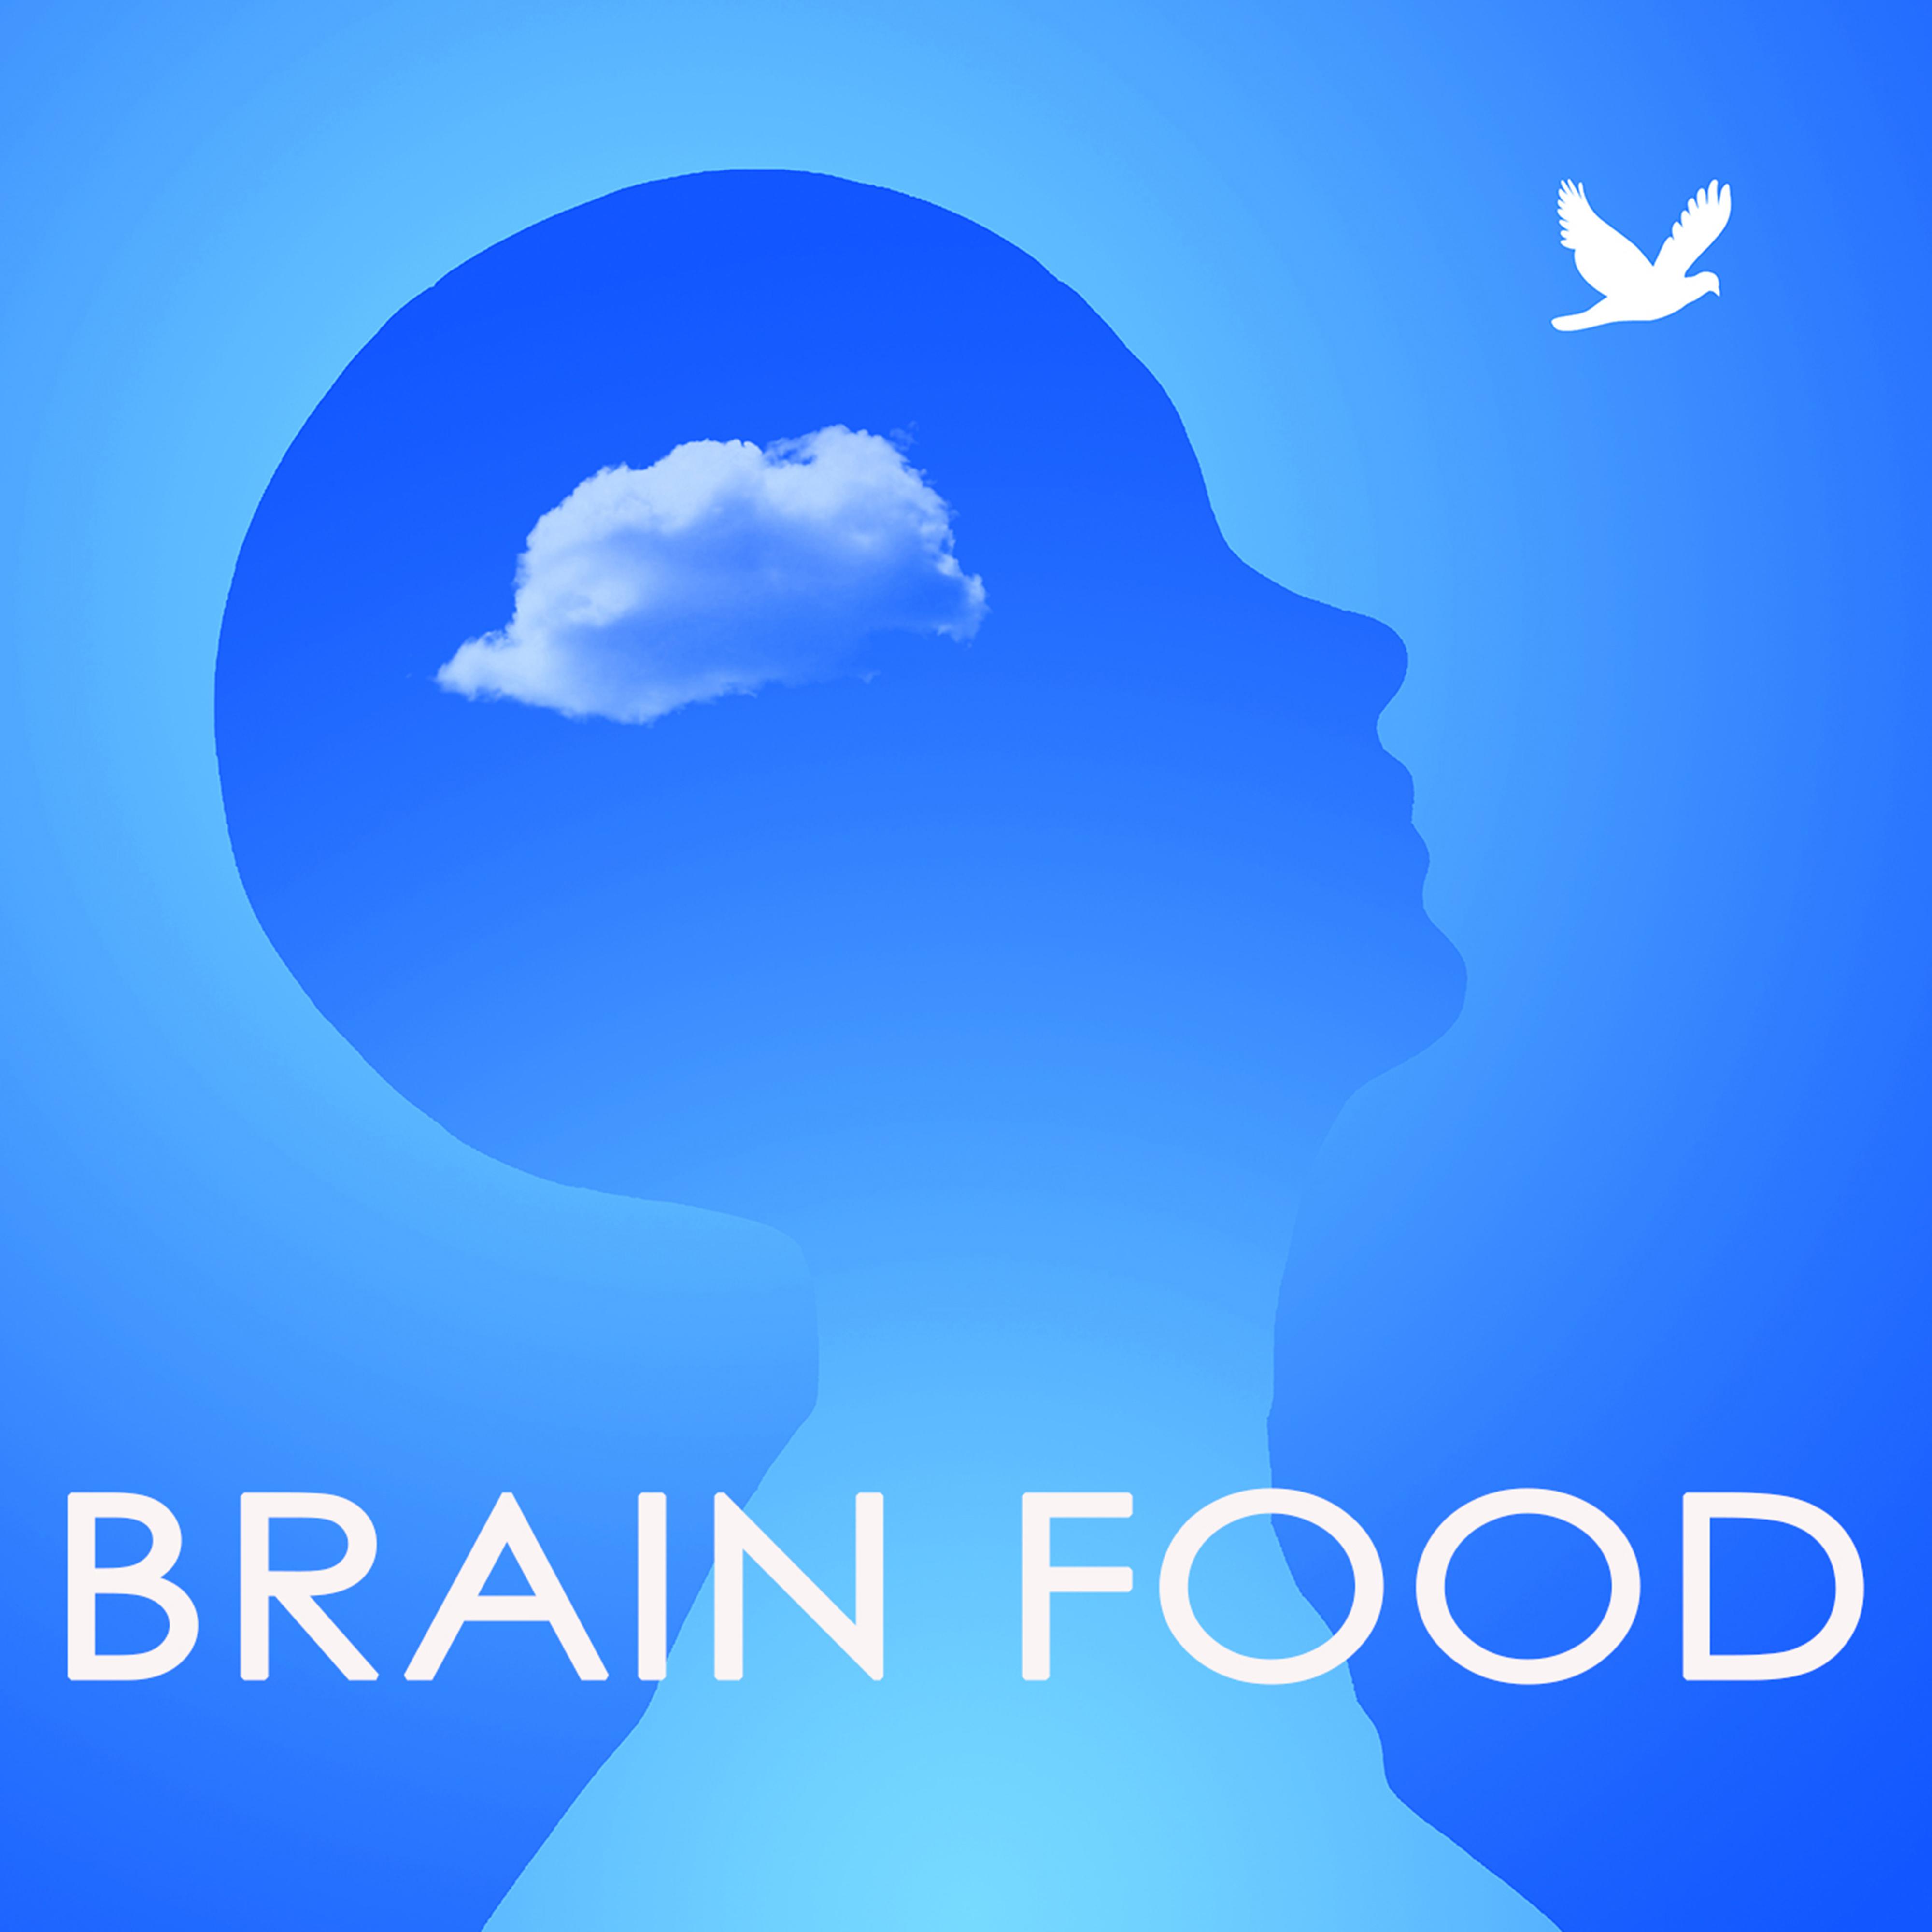 Brain Food – Soft Relaxing Music to Help Your Concentration and Focus, Sound Therapy to Increase the Power of the Mind and Concentrate